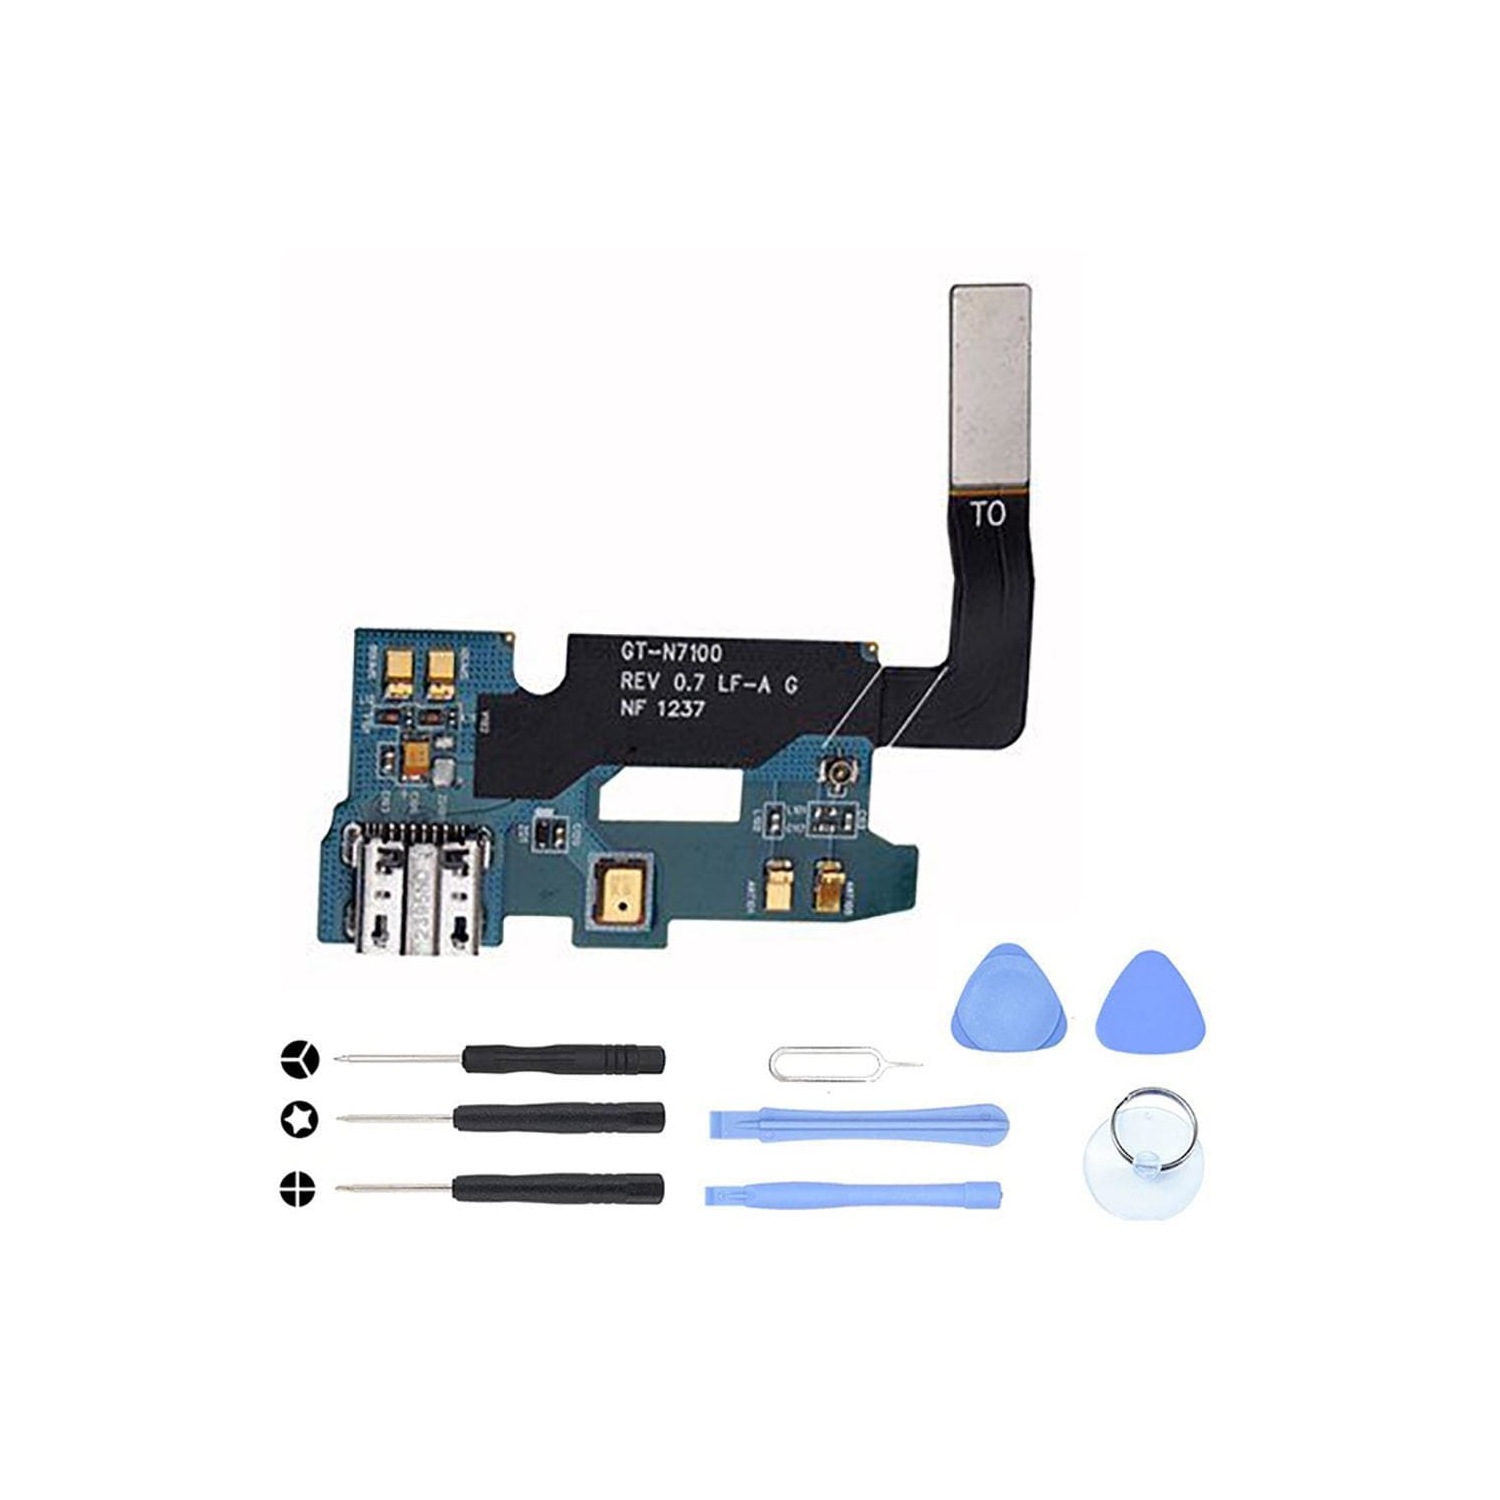 Charging port flex cable and microphone for Samsung Galaxy Note 2 II GT-N7100